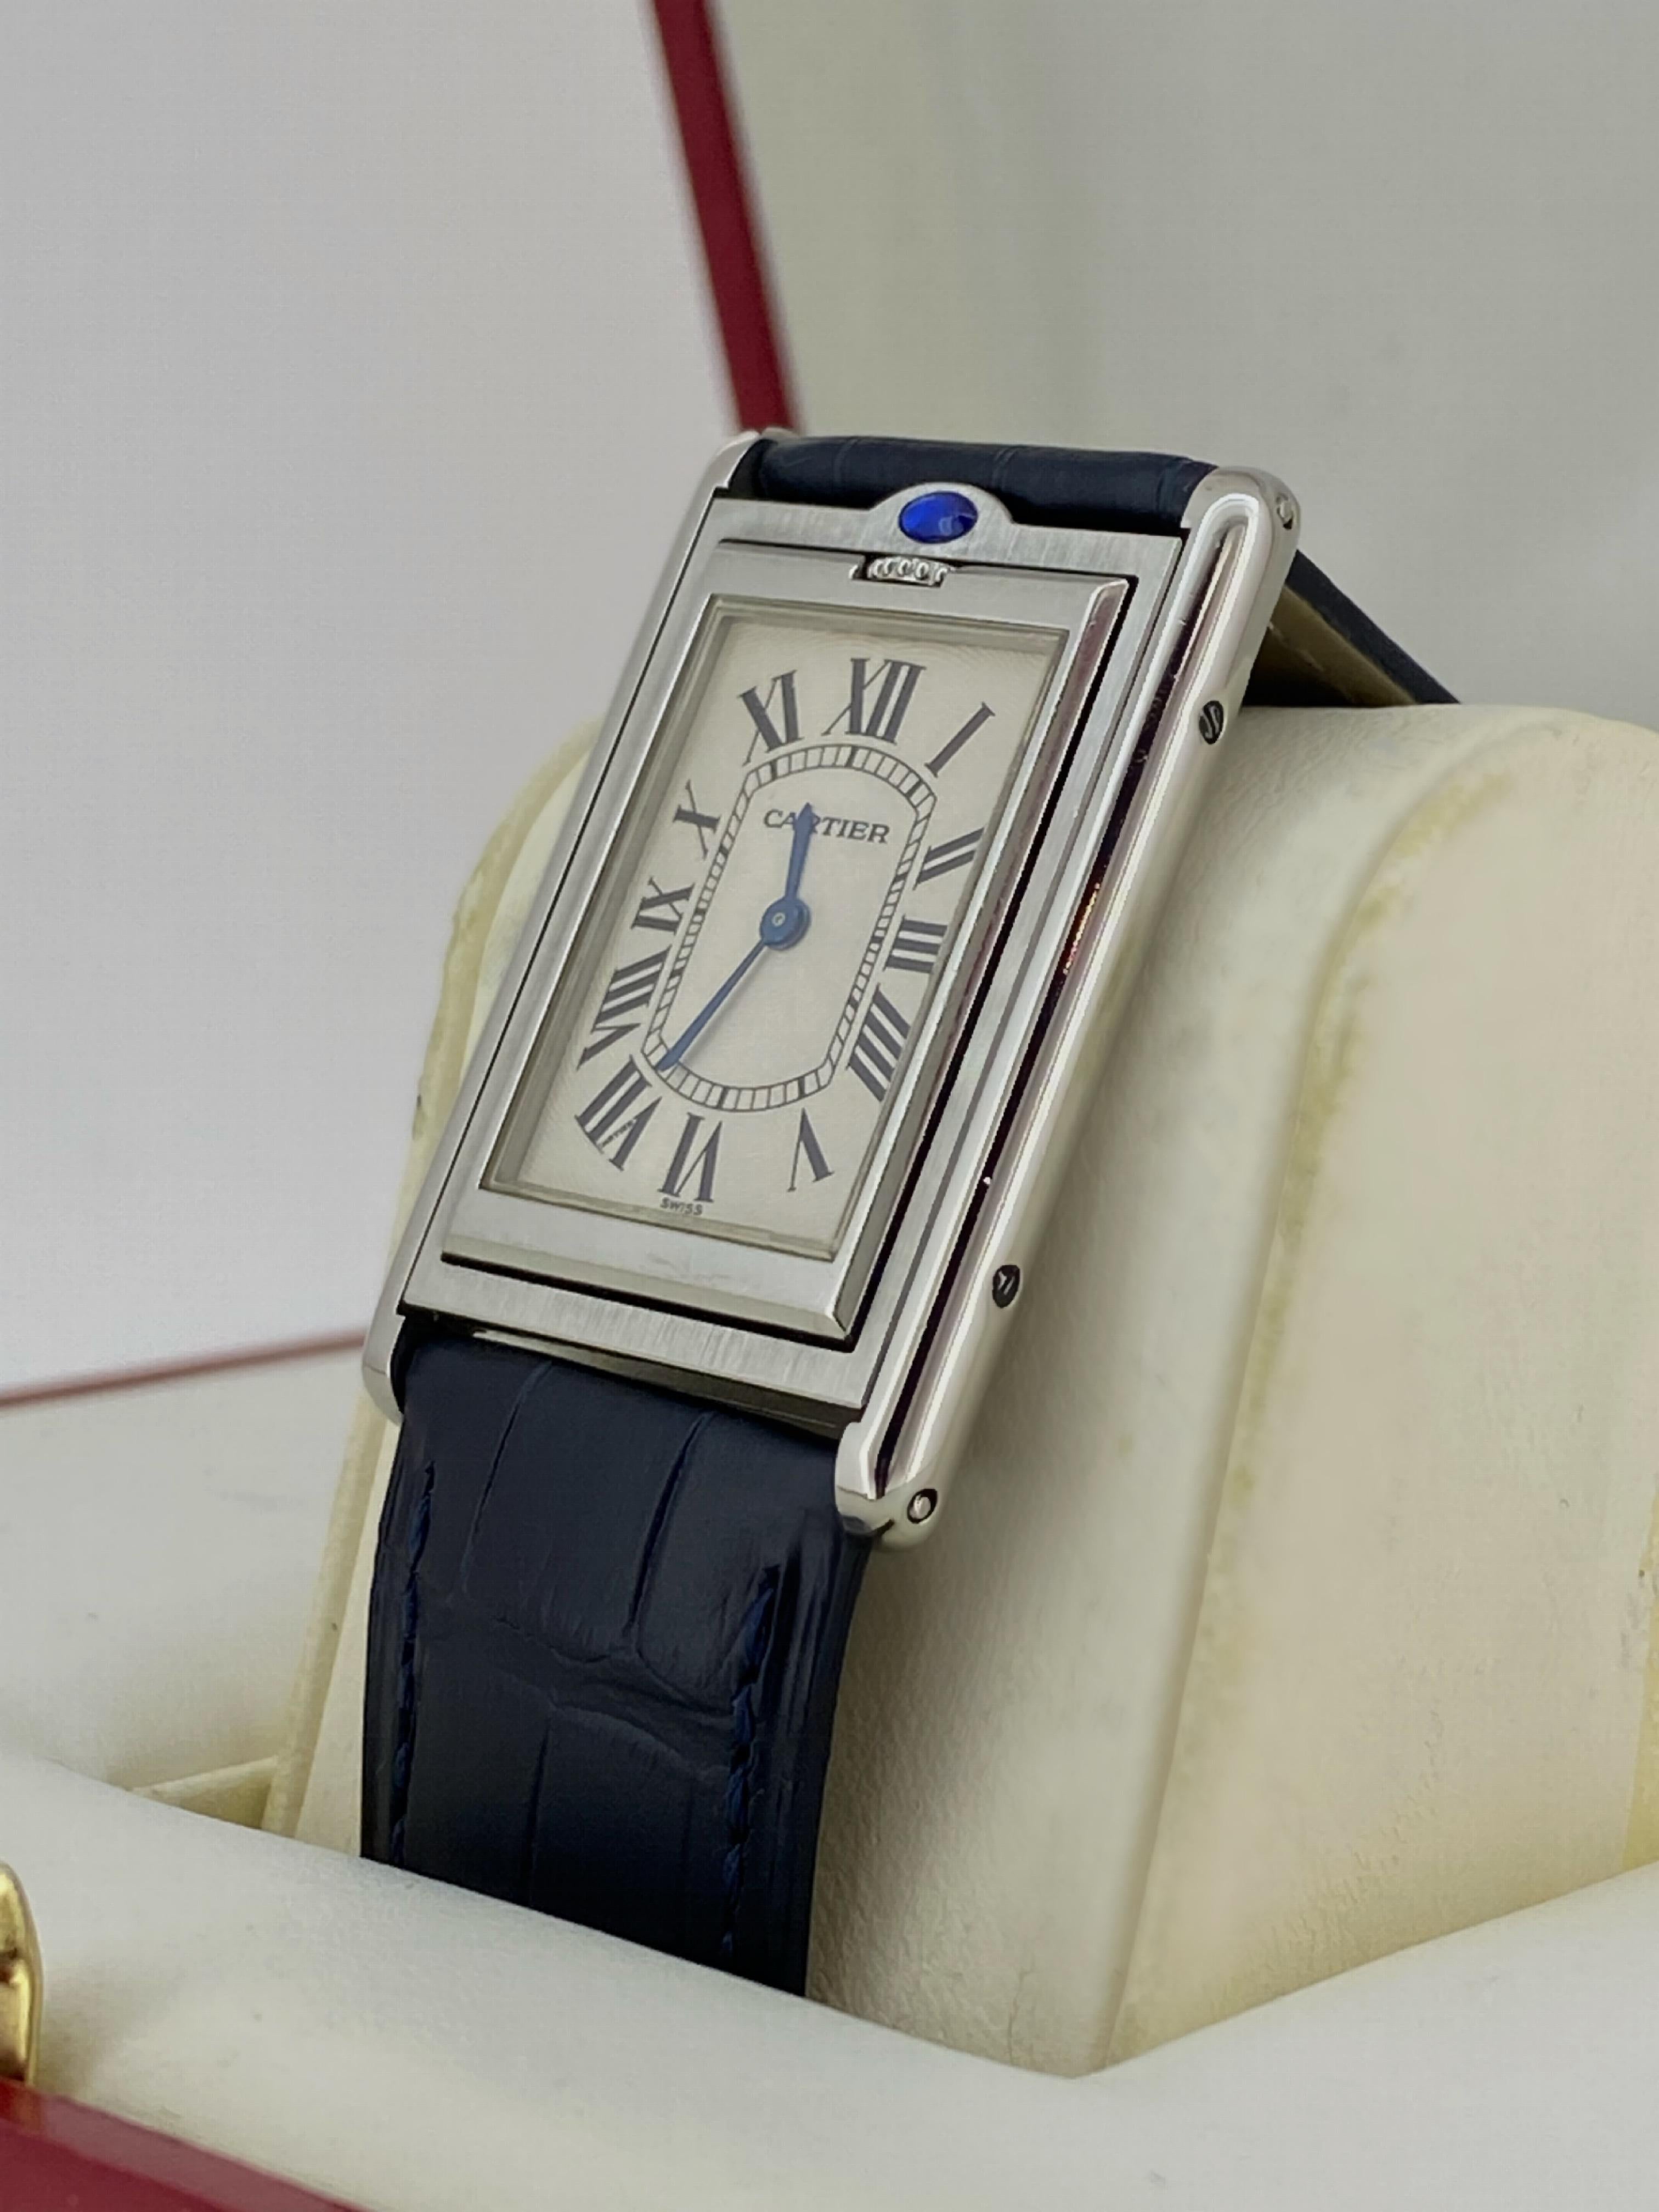 Inspired by the Renault FT-17 tanks, Cartier Tank Wristwatches are iconic & instantly recognizable timepieces. This particular example is a sophisticated Cartier Tank Basculante reference 2390, seldom encountered & highly desirable. 

With its most